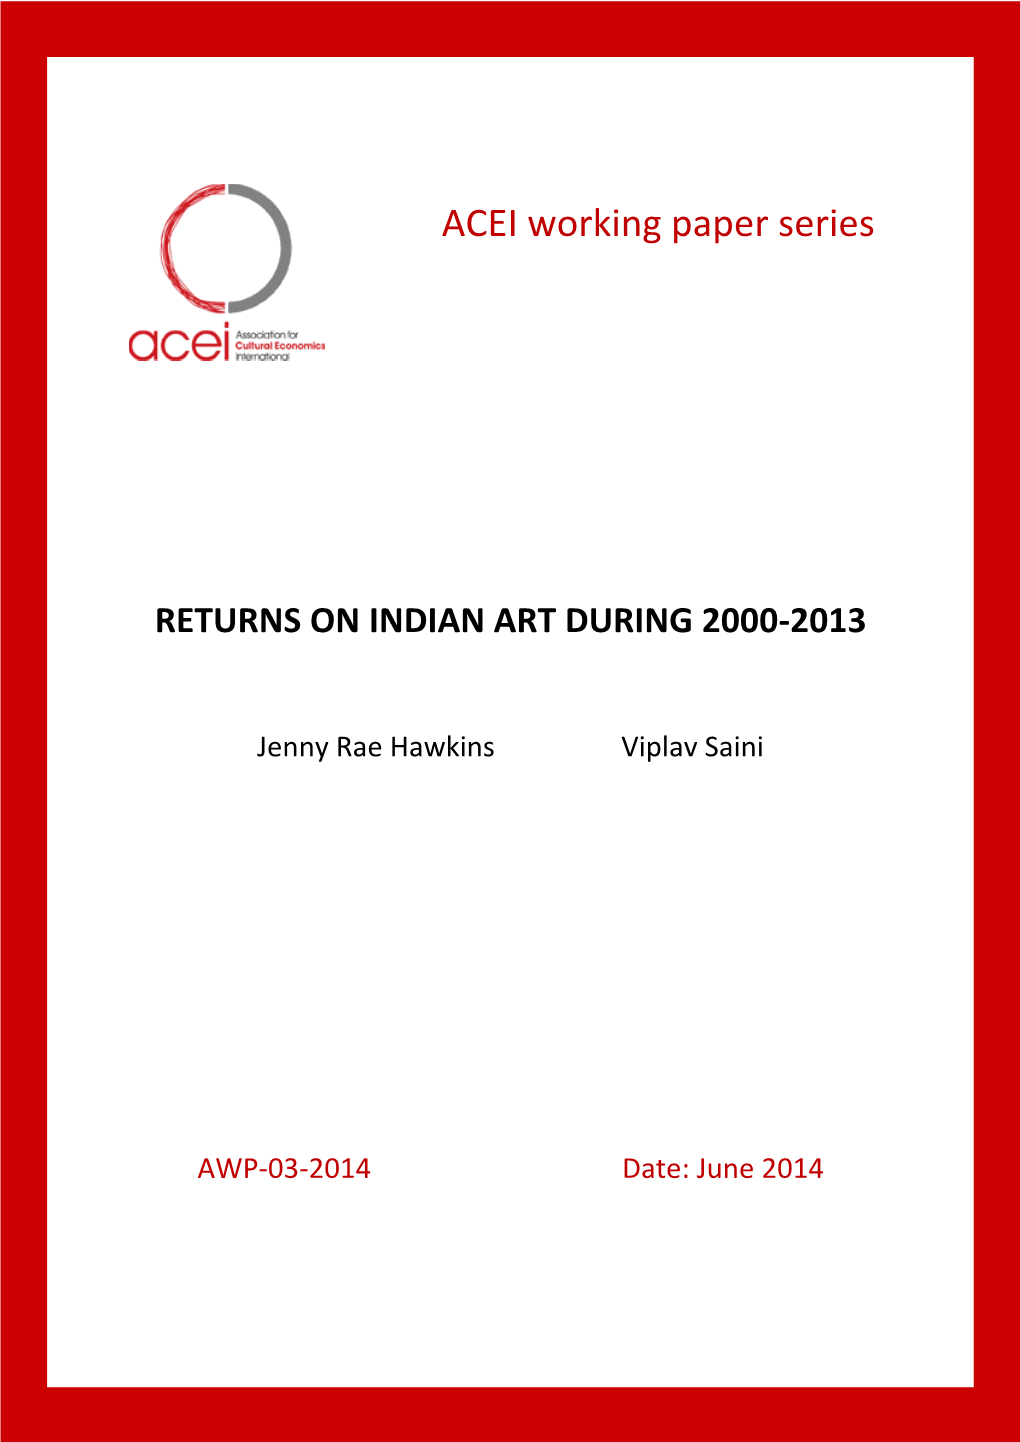 AWP-03-2014 Date: June 2014 Returns on Indian Art During 2000-2013∗